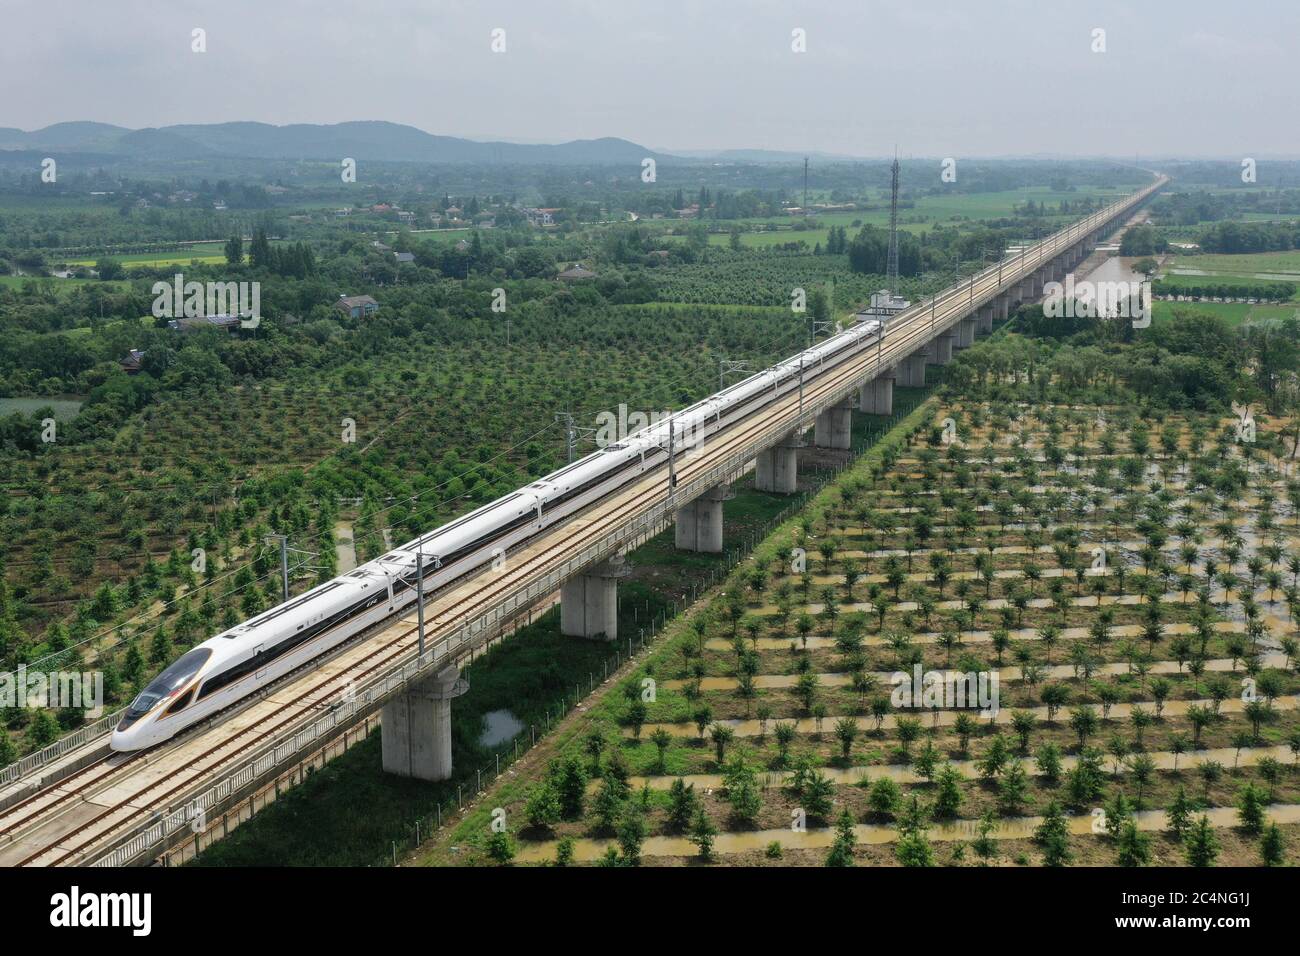 Hangzhou. 28th June, 2020. Aerial photo taken on June 28, 2020 shows a bullet train running on the Shangqiu-Hefei-Hangzhou high-speed railway in Anji County, east China's Zhejiang Province. A new high-speed railway route connecting east and central China started operation on Sunday. With a designed speed of 350 kph, the route connects the city of Shangqiu in central China's Henan Province, and Hefei and Hangzhou, the capital cities of east China's Anhui and Zhejiang provinces. Credit: Huang Zongzhi/Xinhua/Alamy Live News Stock Photo